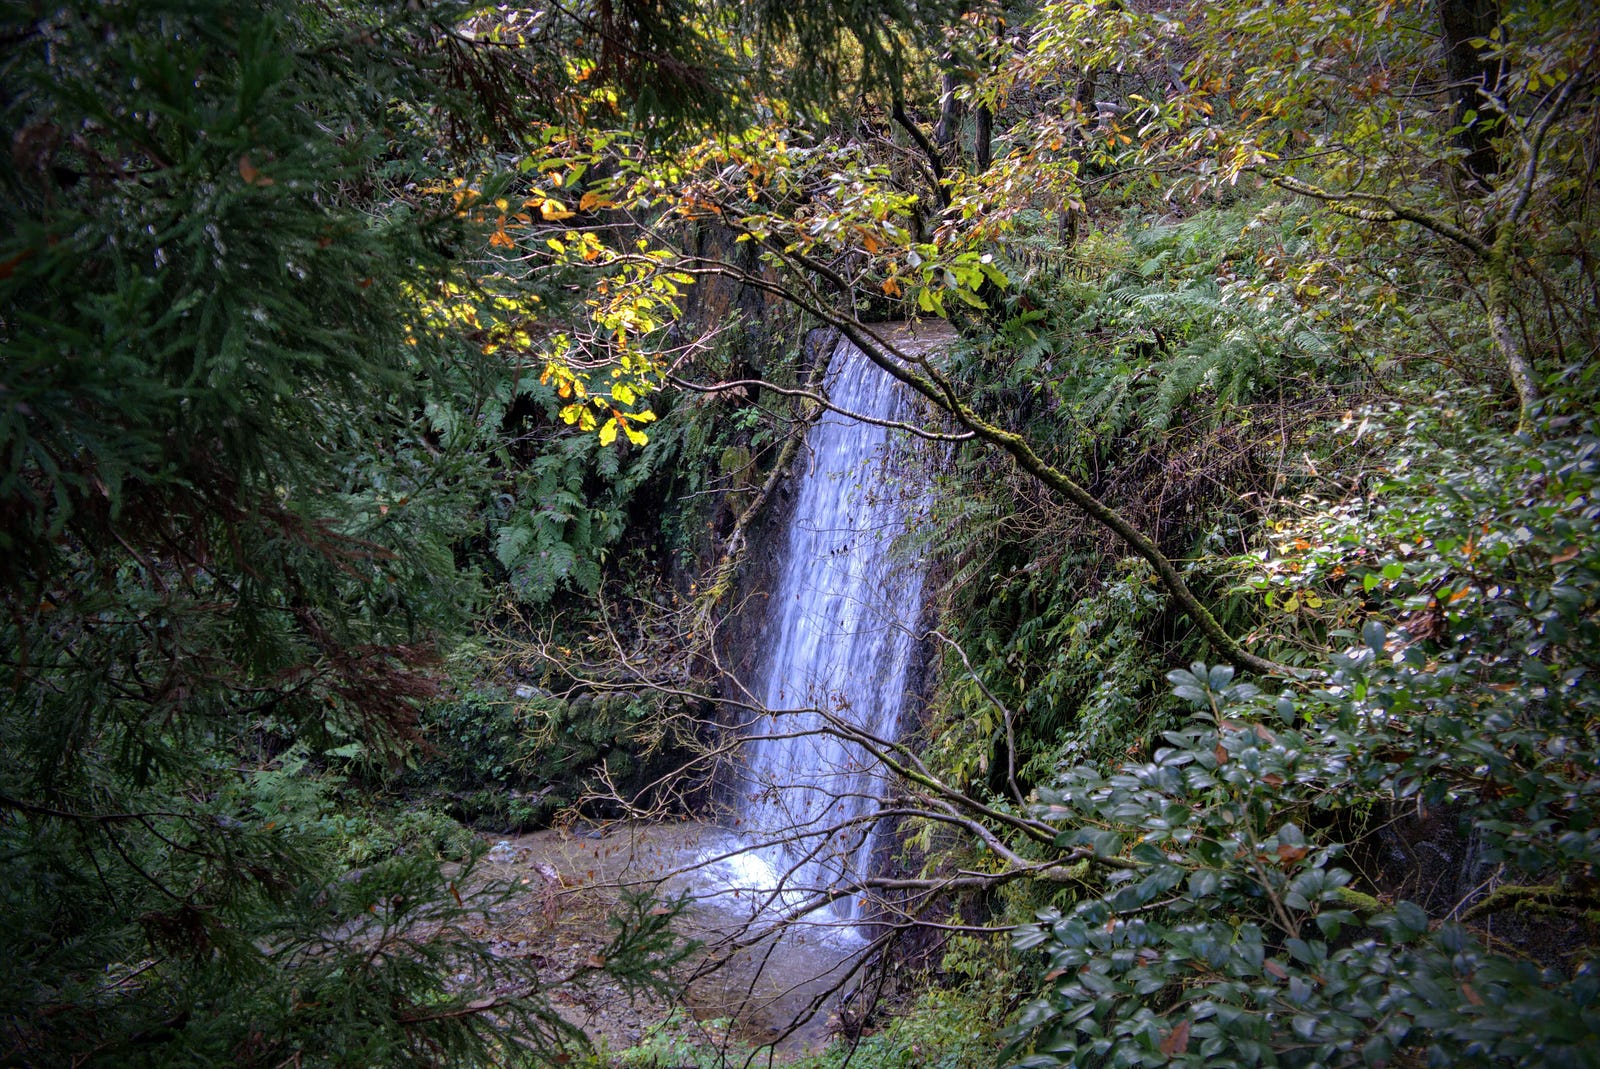 A straight waterfall surrounded by autumn foliage on Mt. Hokari, one of the 100 Famous Mountains of Yamagata